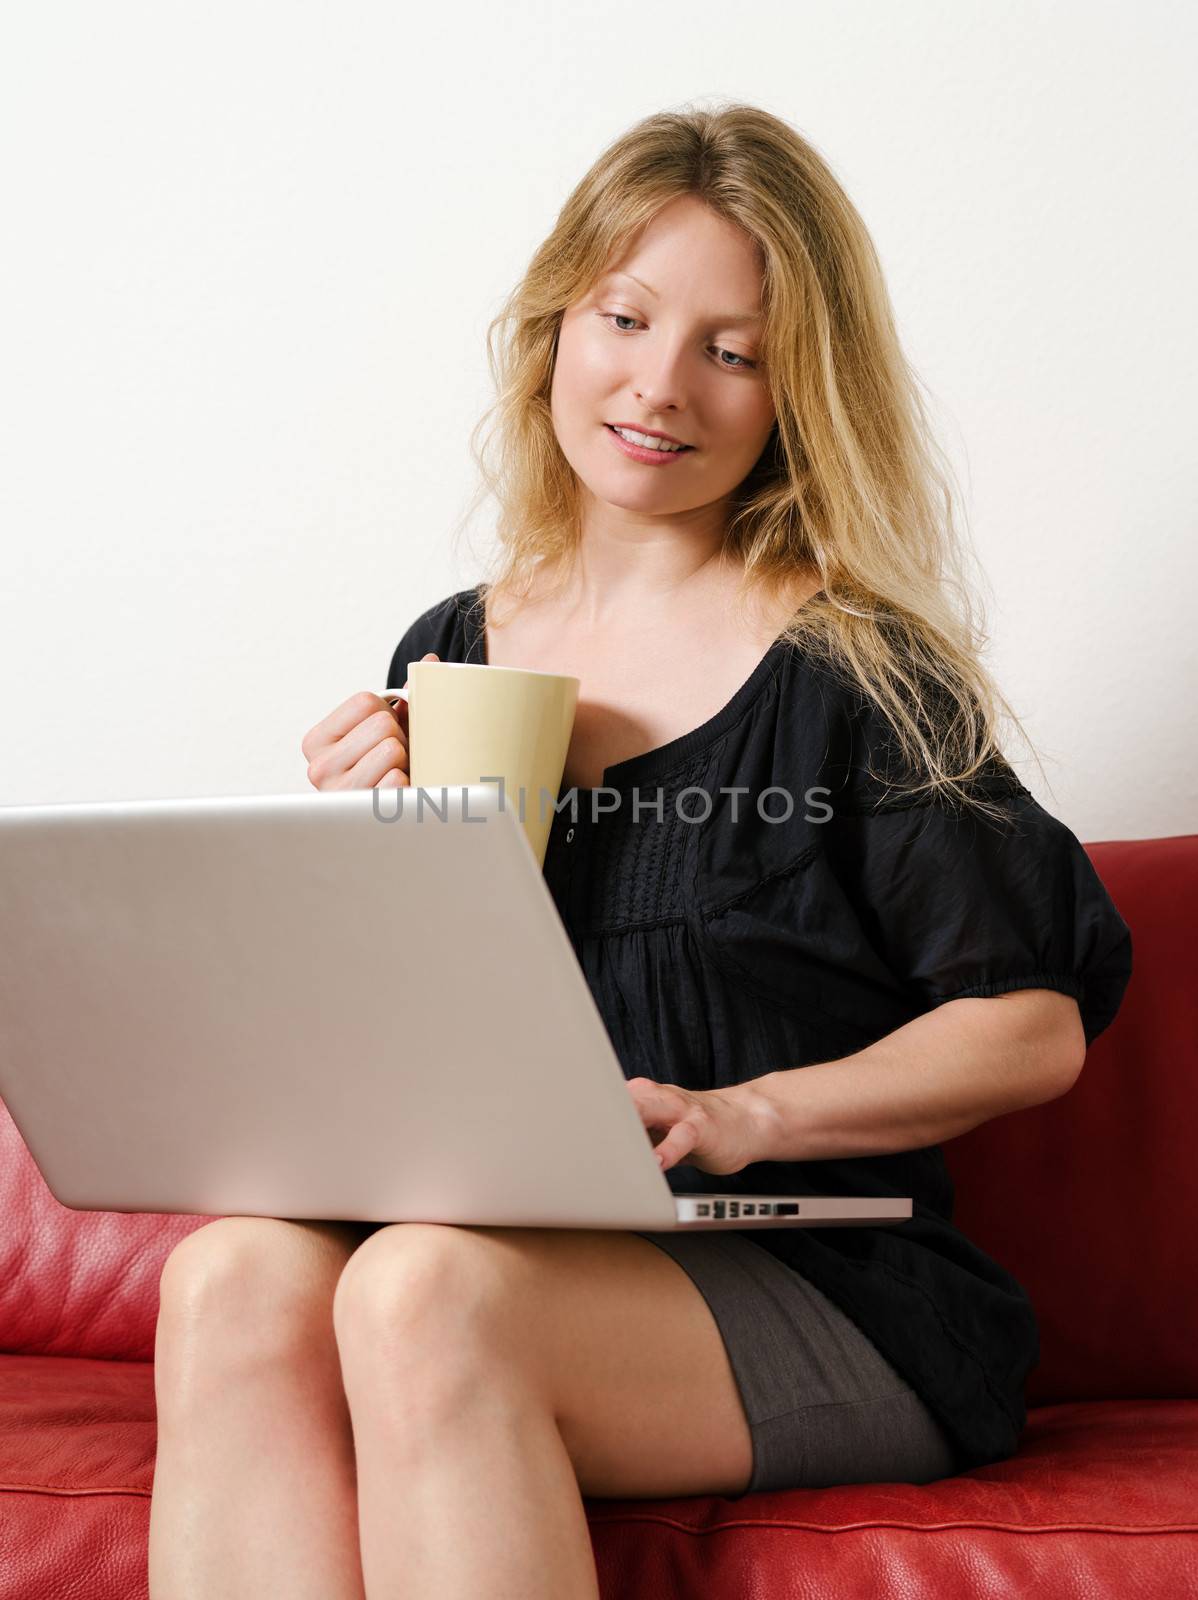 Photo of a beautiful young female shopping online and drinking coffee at home.
